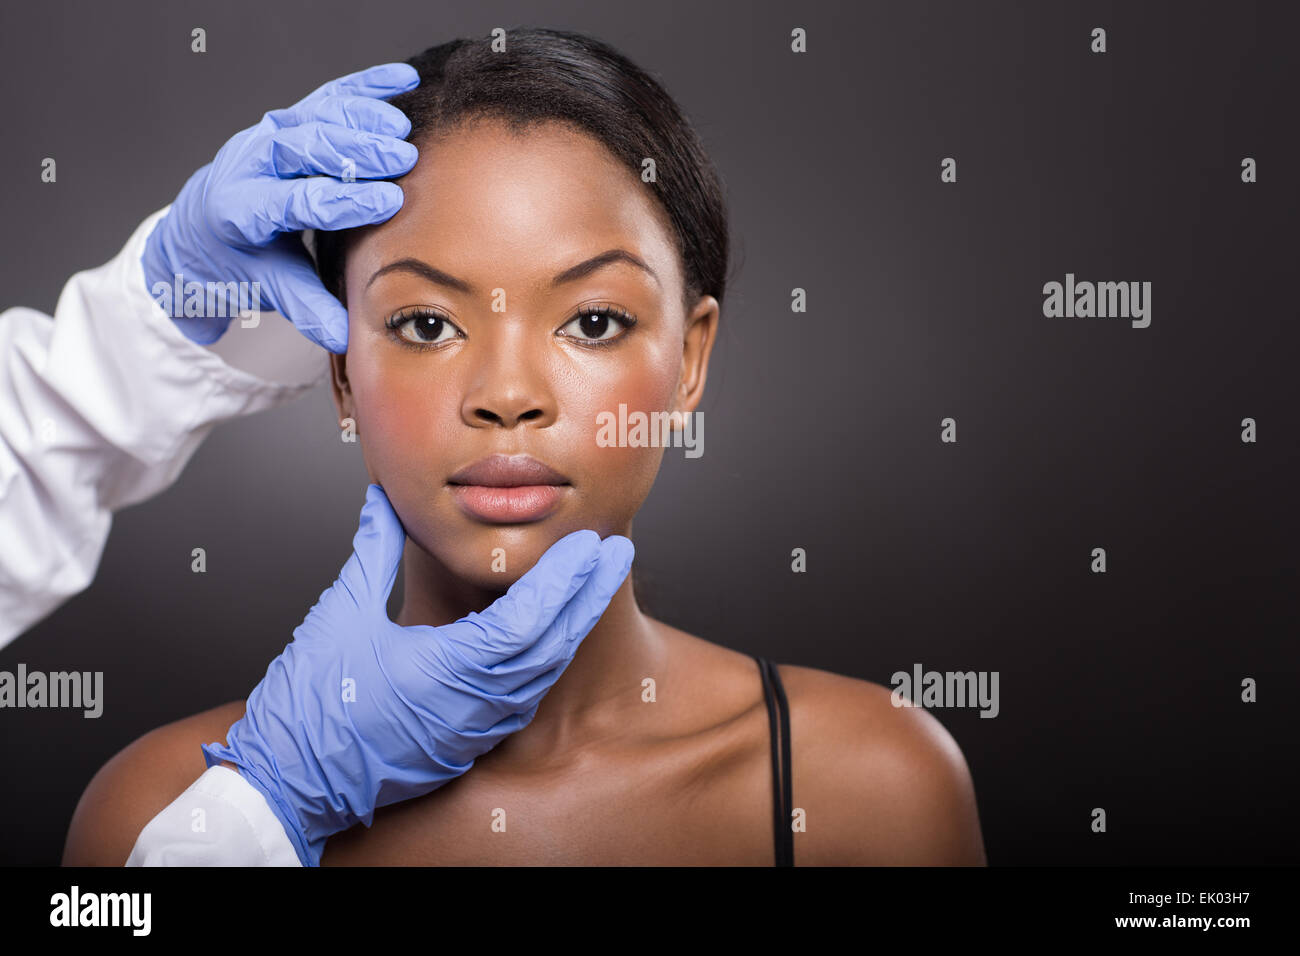 dermatologist checking pretty African woman face skin Stock Photo